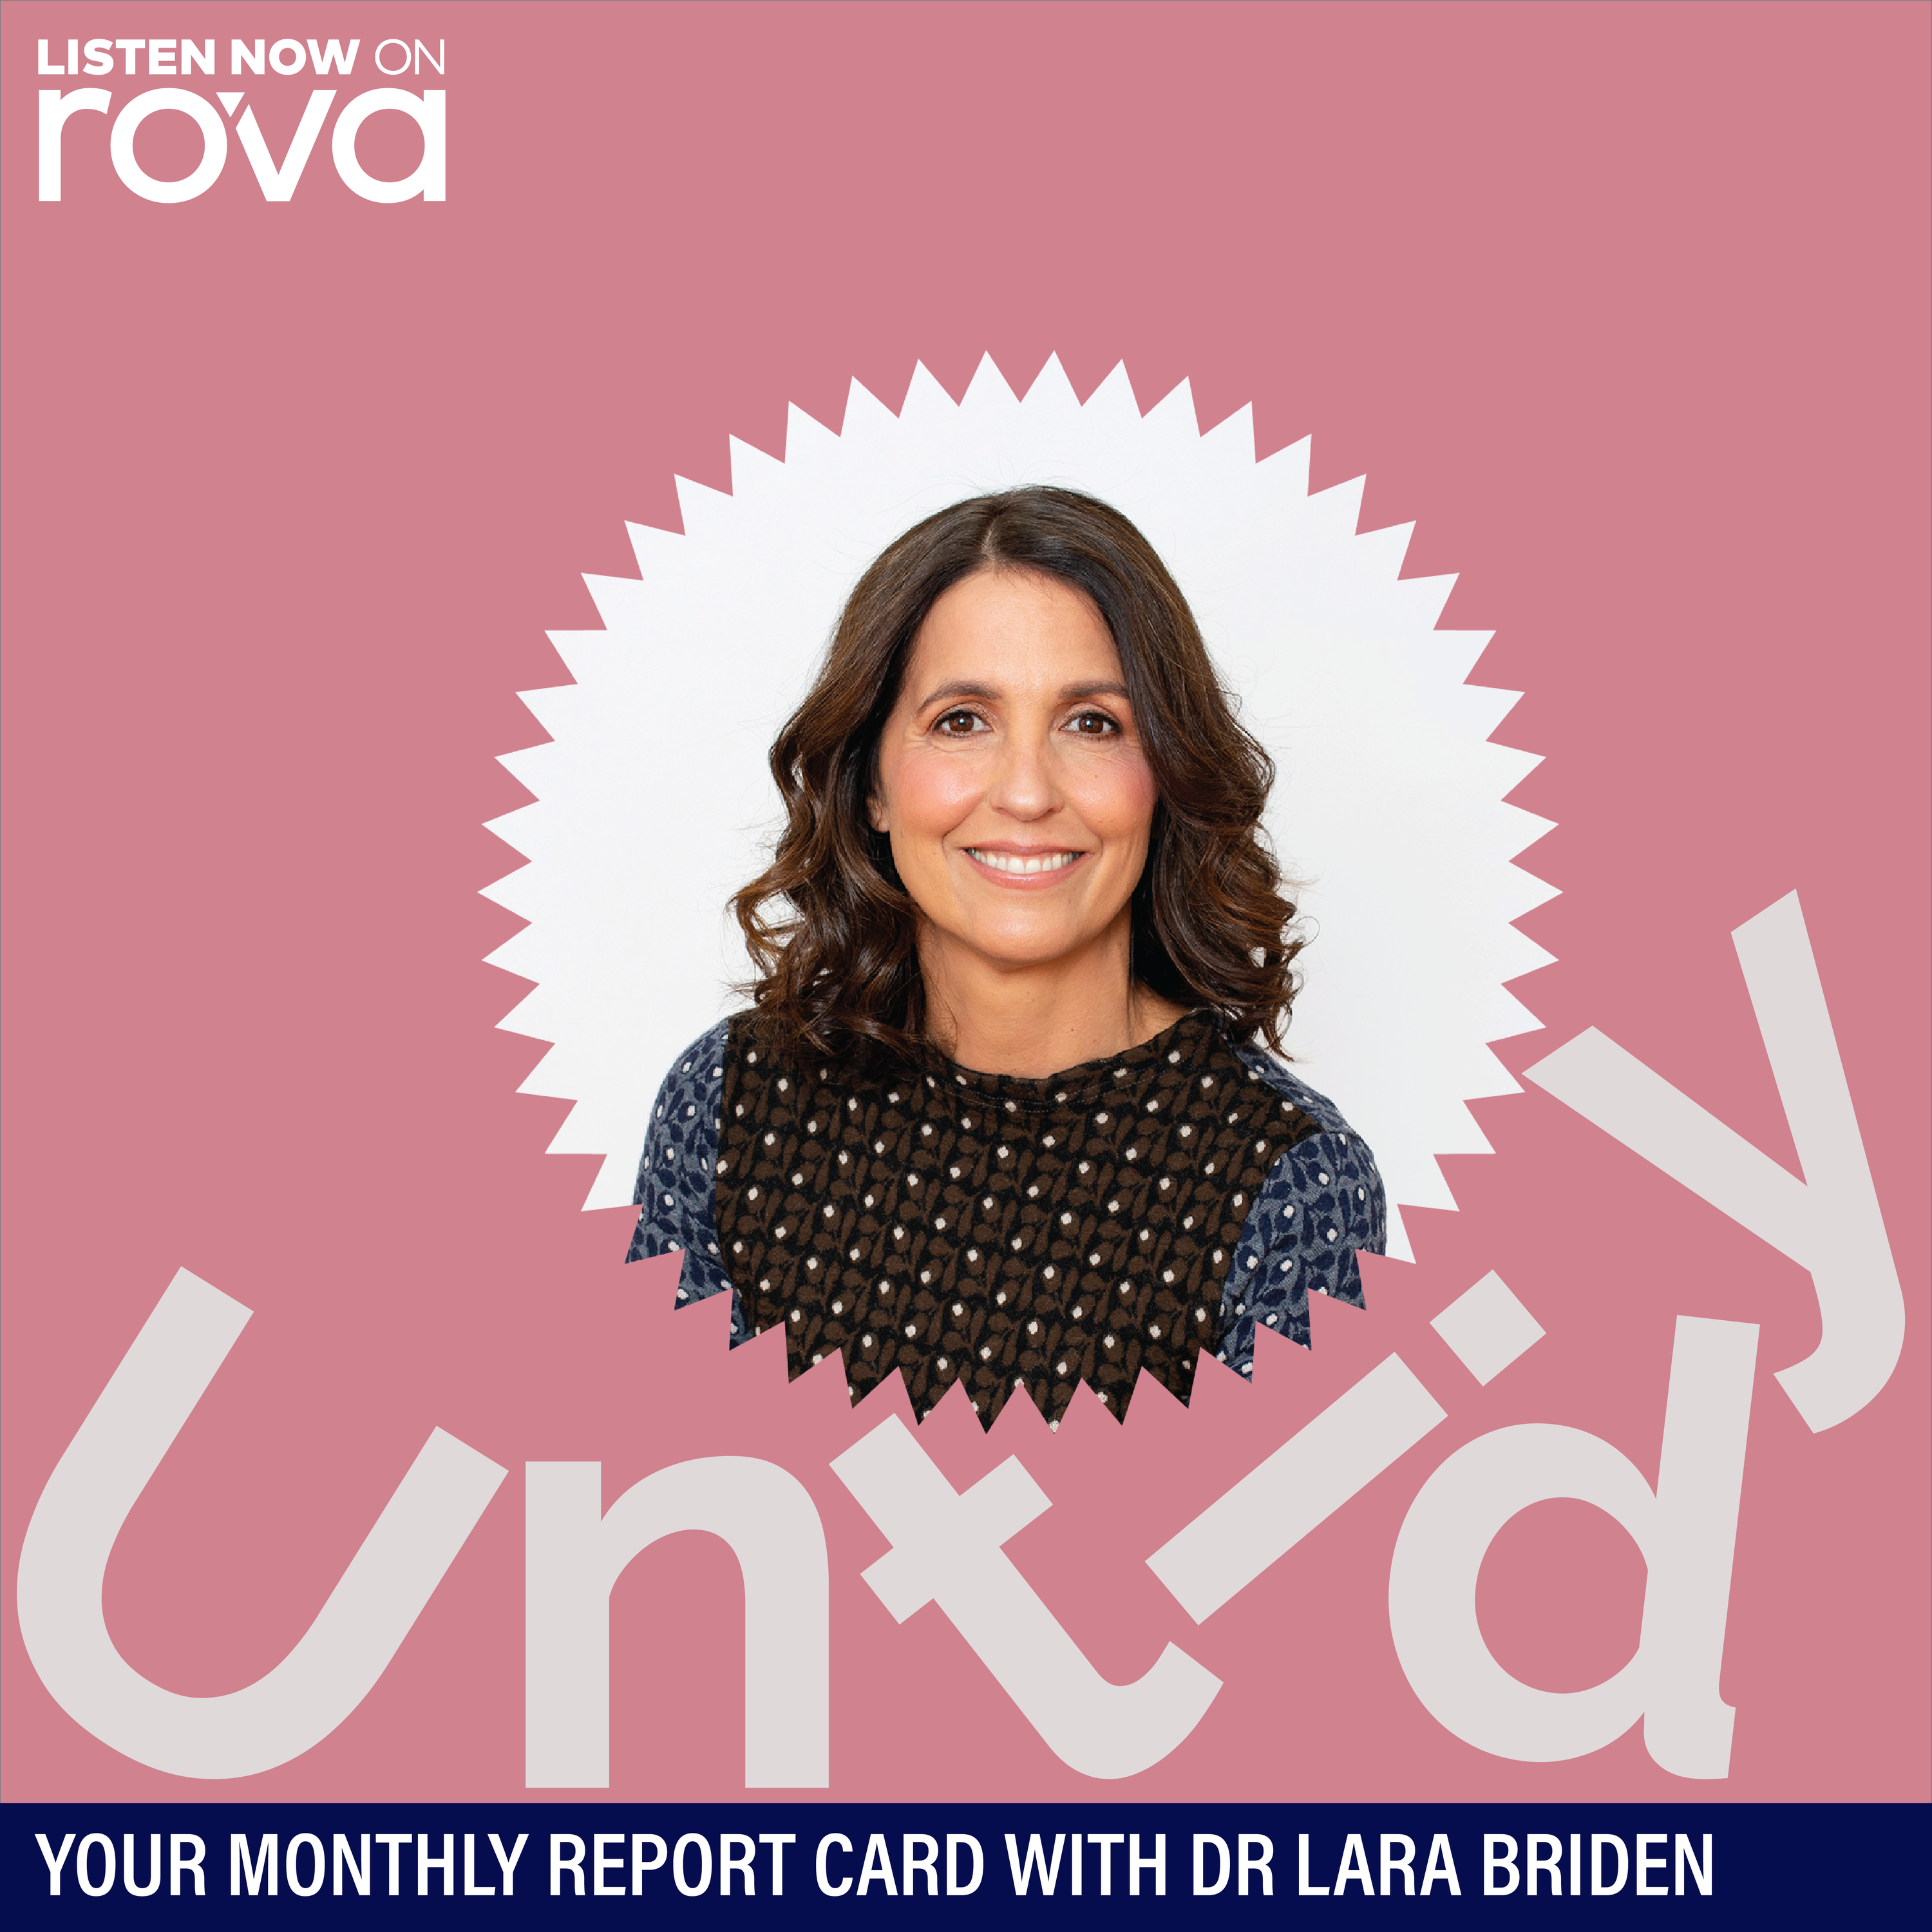 Your monthly report card with Dr Lara Briden